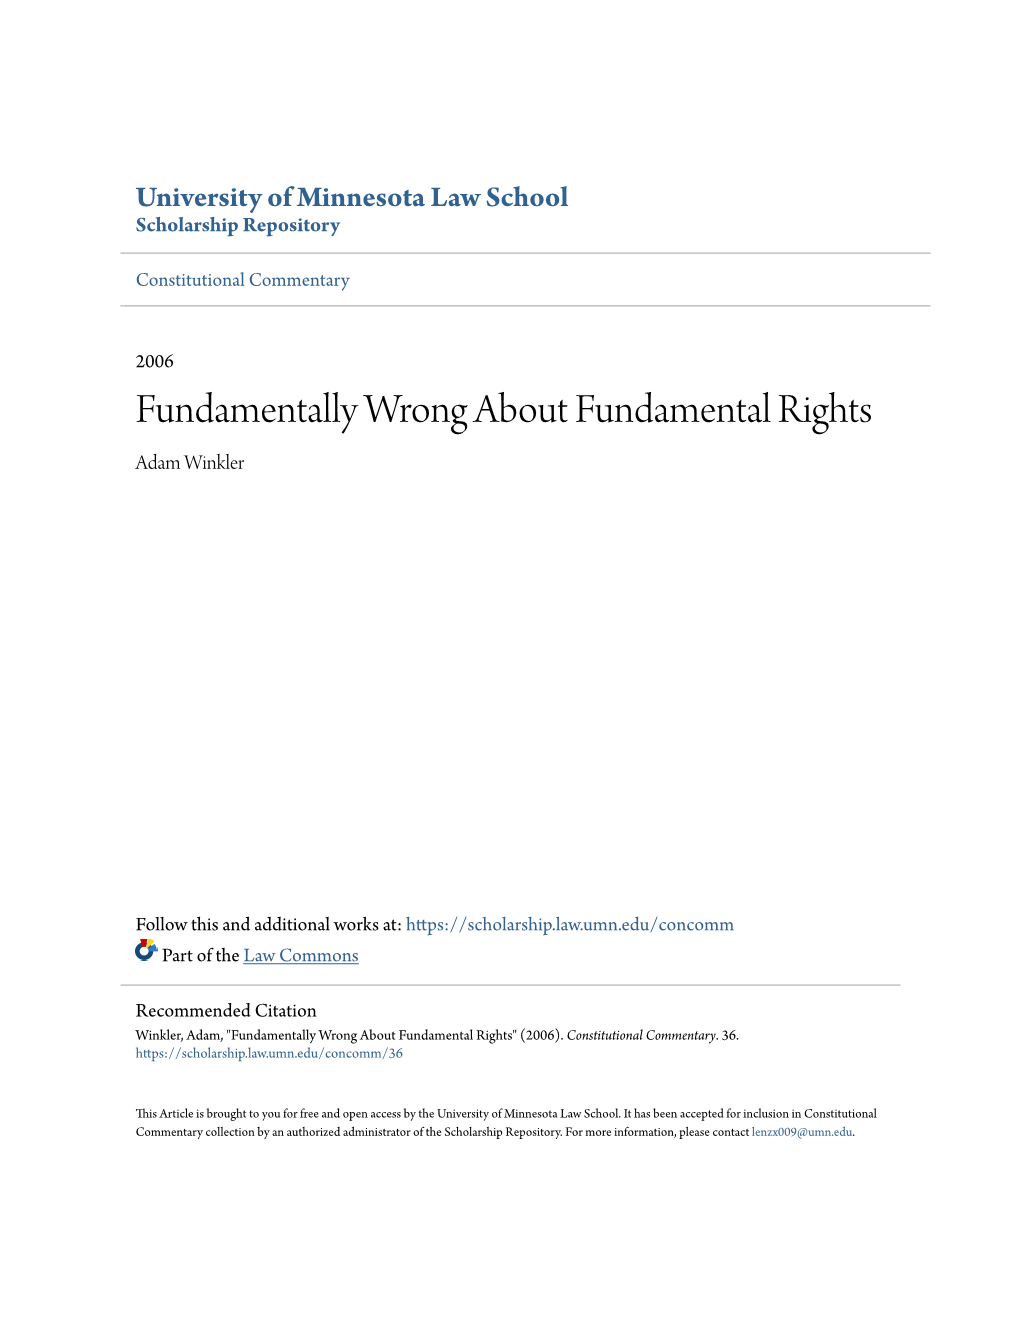 Fundamentally Wrong About Fundamental Rights Adam Winkler